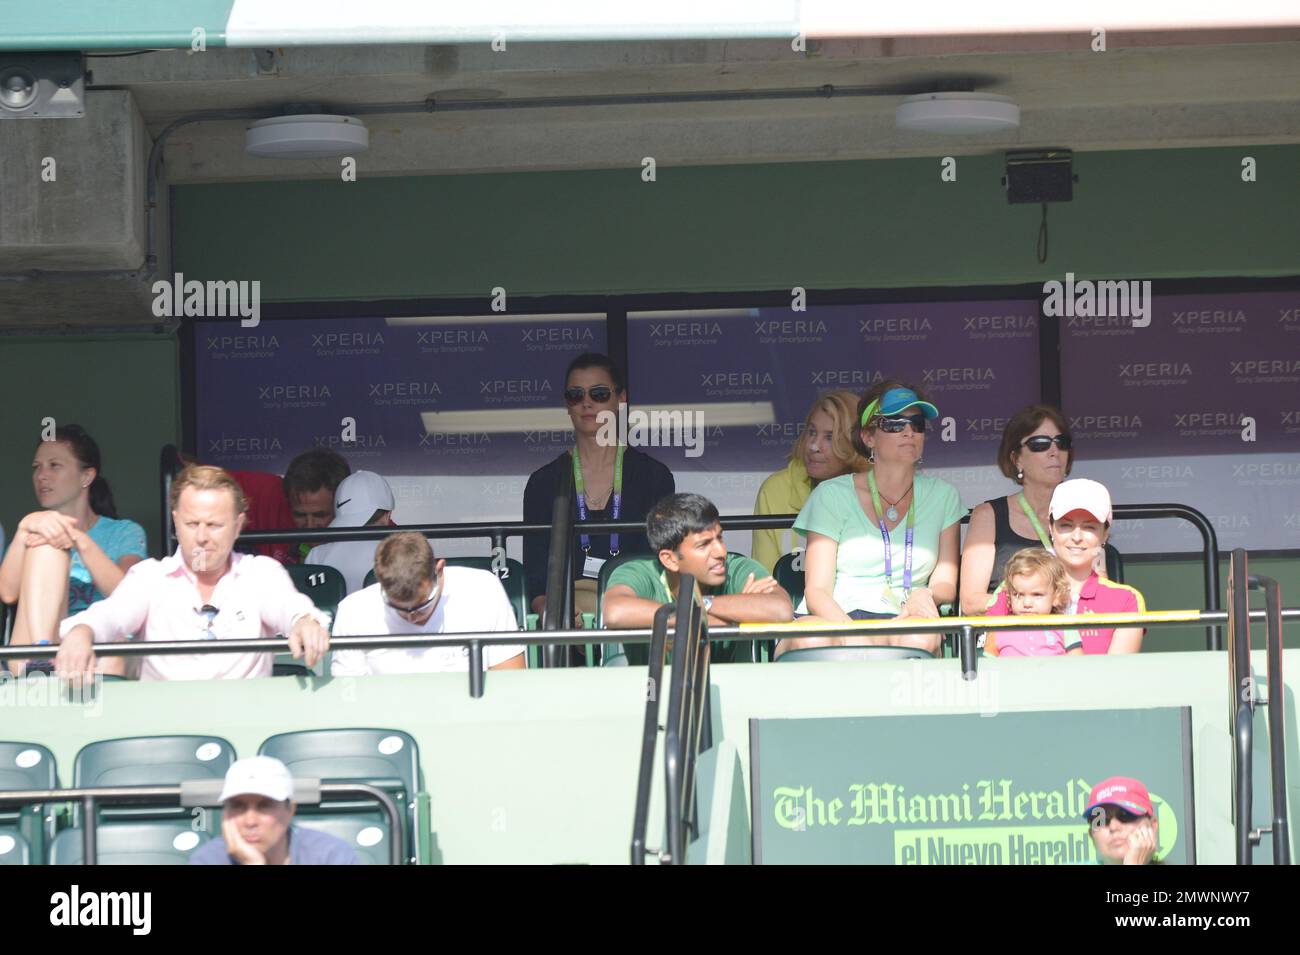 KEY BISCAYNE, FL - MARCH 24: Quarterback Tom Brady baby mama and Coyote Ugly Actress Bridget Moynahan and son Jack Brady day 7 at the Sony Open at Crandon Park Tennis Center.  Kathryn Bridget Moynahan (born April 28, 1970, known as Bridget Moynahan, is an American model and actress on March 24, 2013 in Key Biscayne, Florida.   People:  Bridget Moynahan Jack Brady Stock Photo